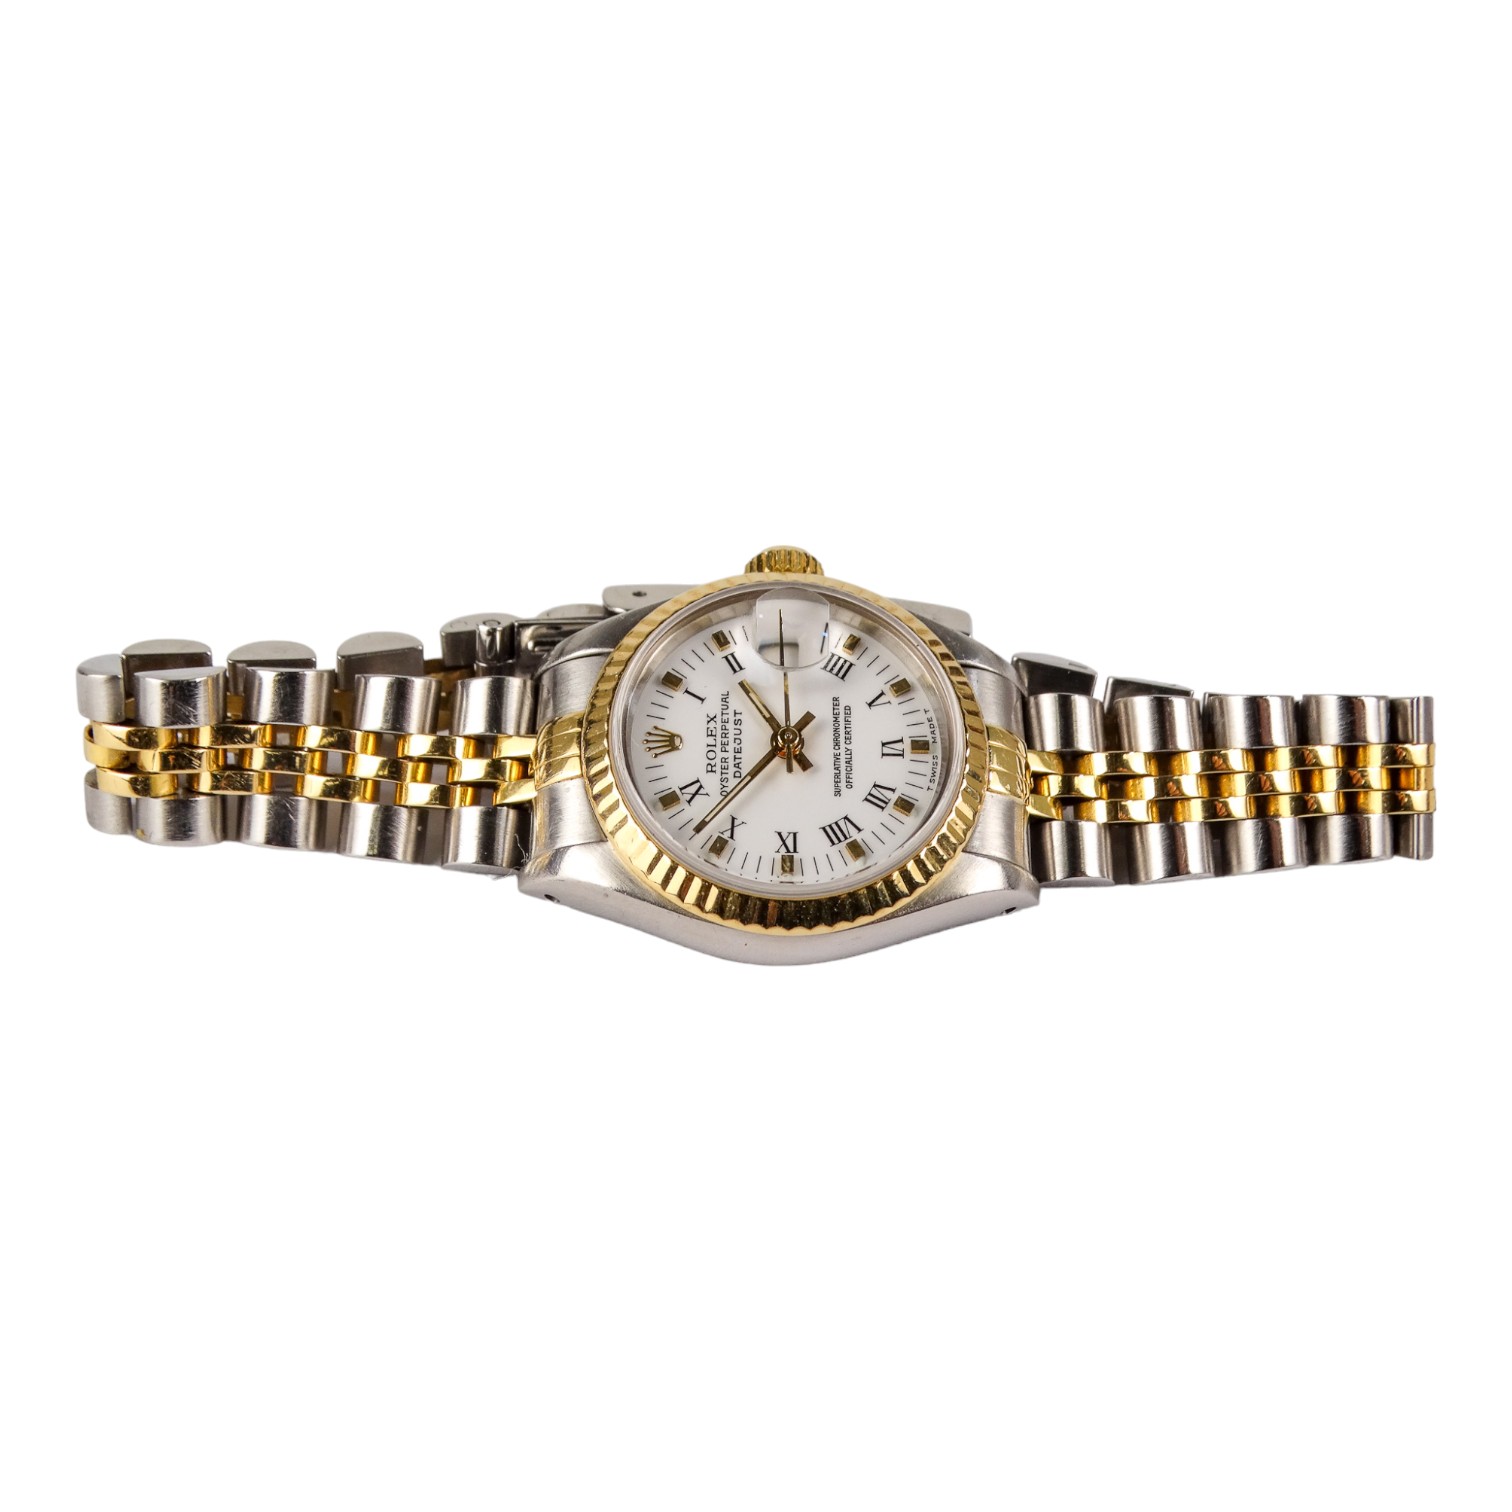 A Rolex ladies 18ct gold and steel Oyster Perpetual Datejust chronometer wristwatch - with baton